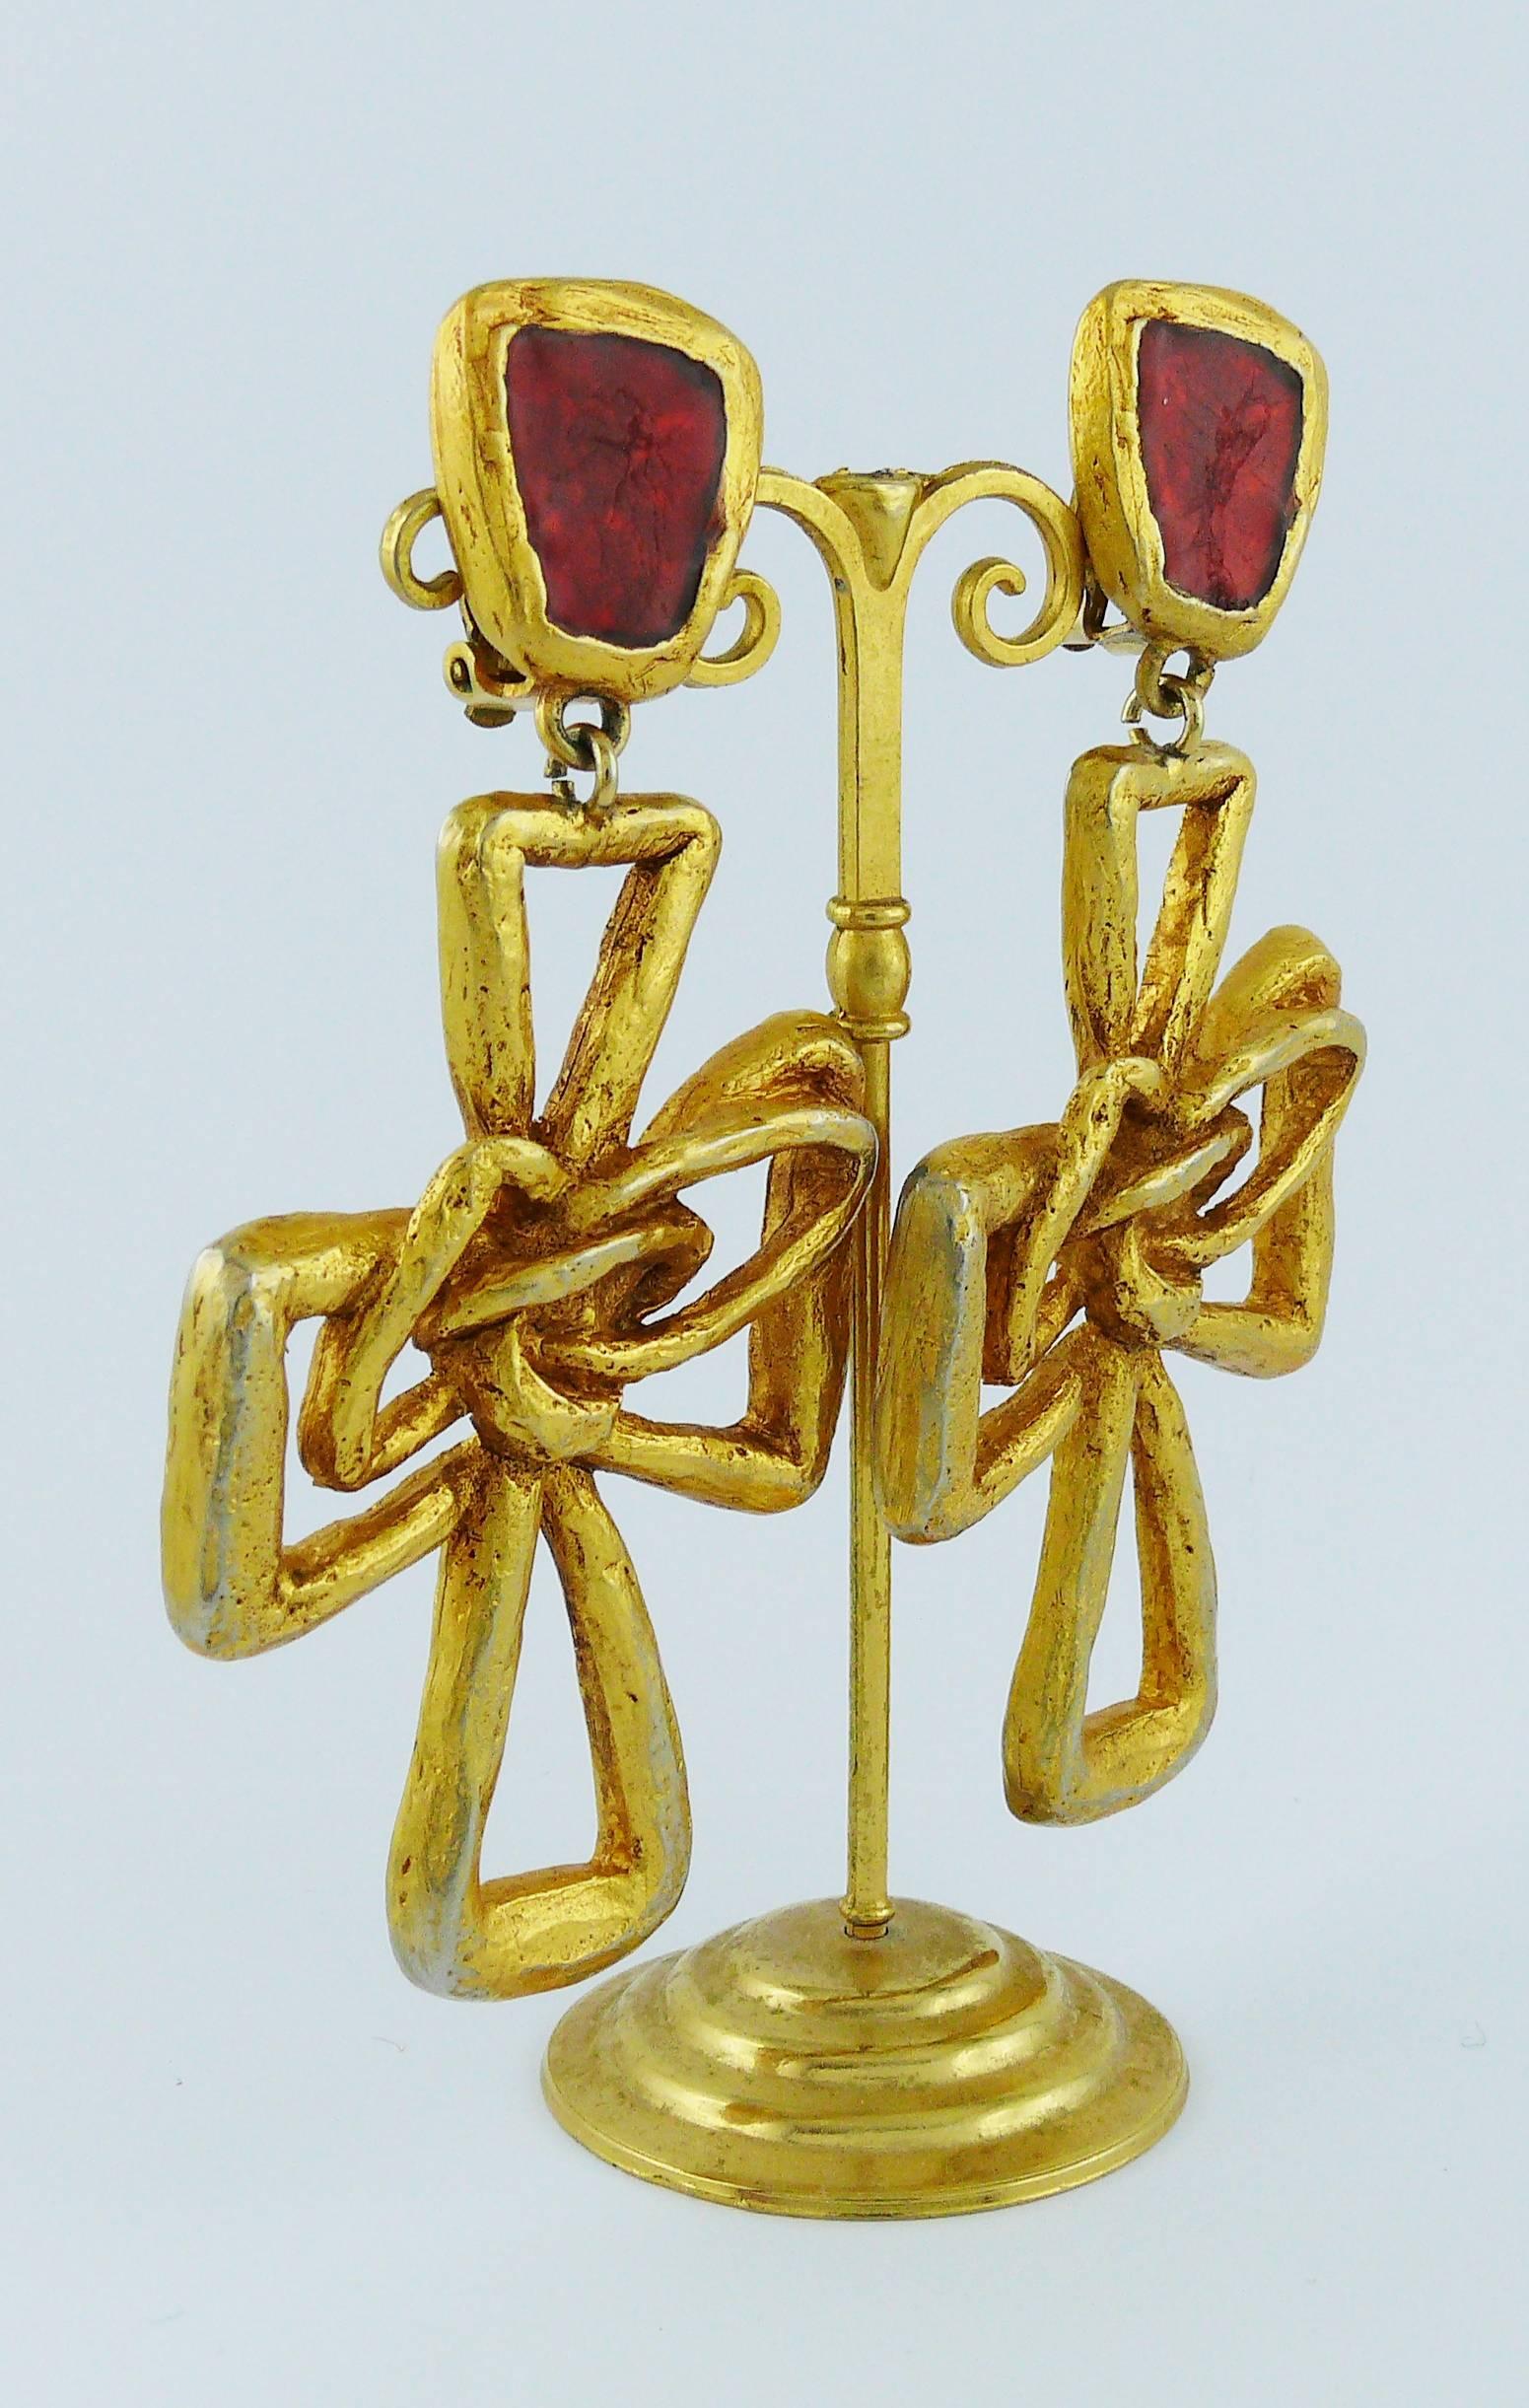 CHRISTIAN LACROIX vintage massive gold toned dangling earrings (clip-on) featuring a wired cross with a red resin top.

Marked CHRISTIAN LACROIX CL Made in France.

Indicative measurements : length approx. 9.4 cm (3.70 inches) / max. width approx.